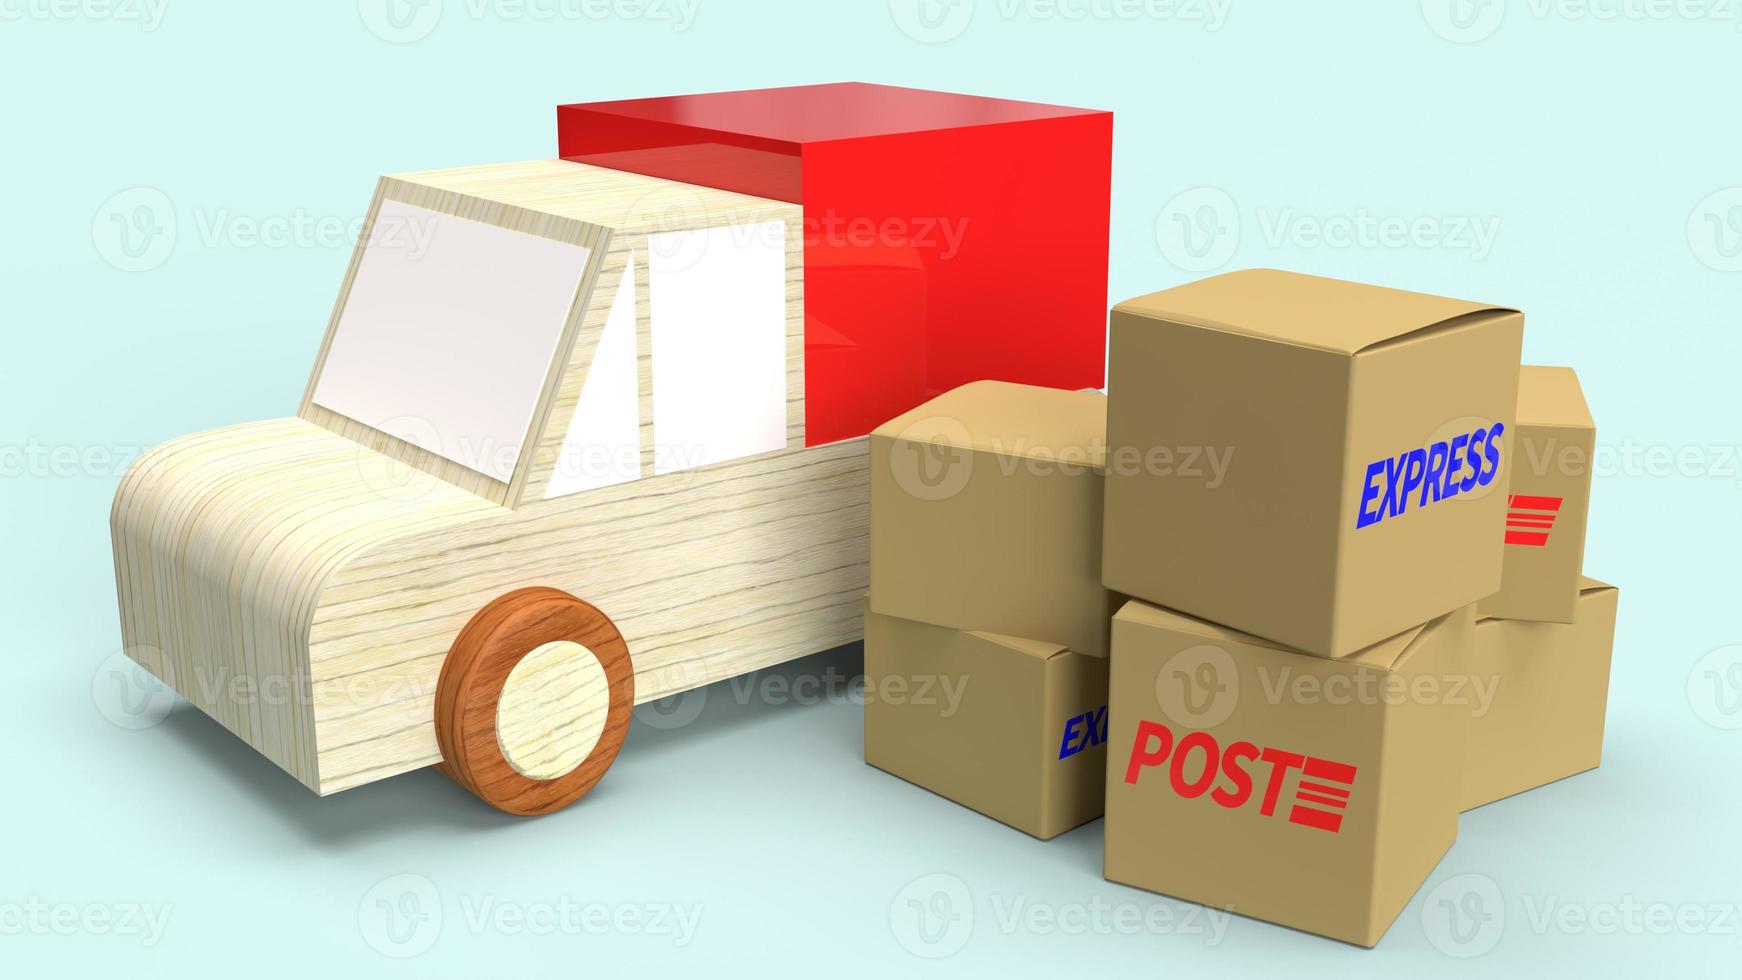 Postal boxes and wood van truck 3d rendering for delivery content. photo